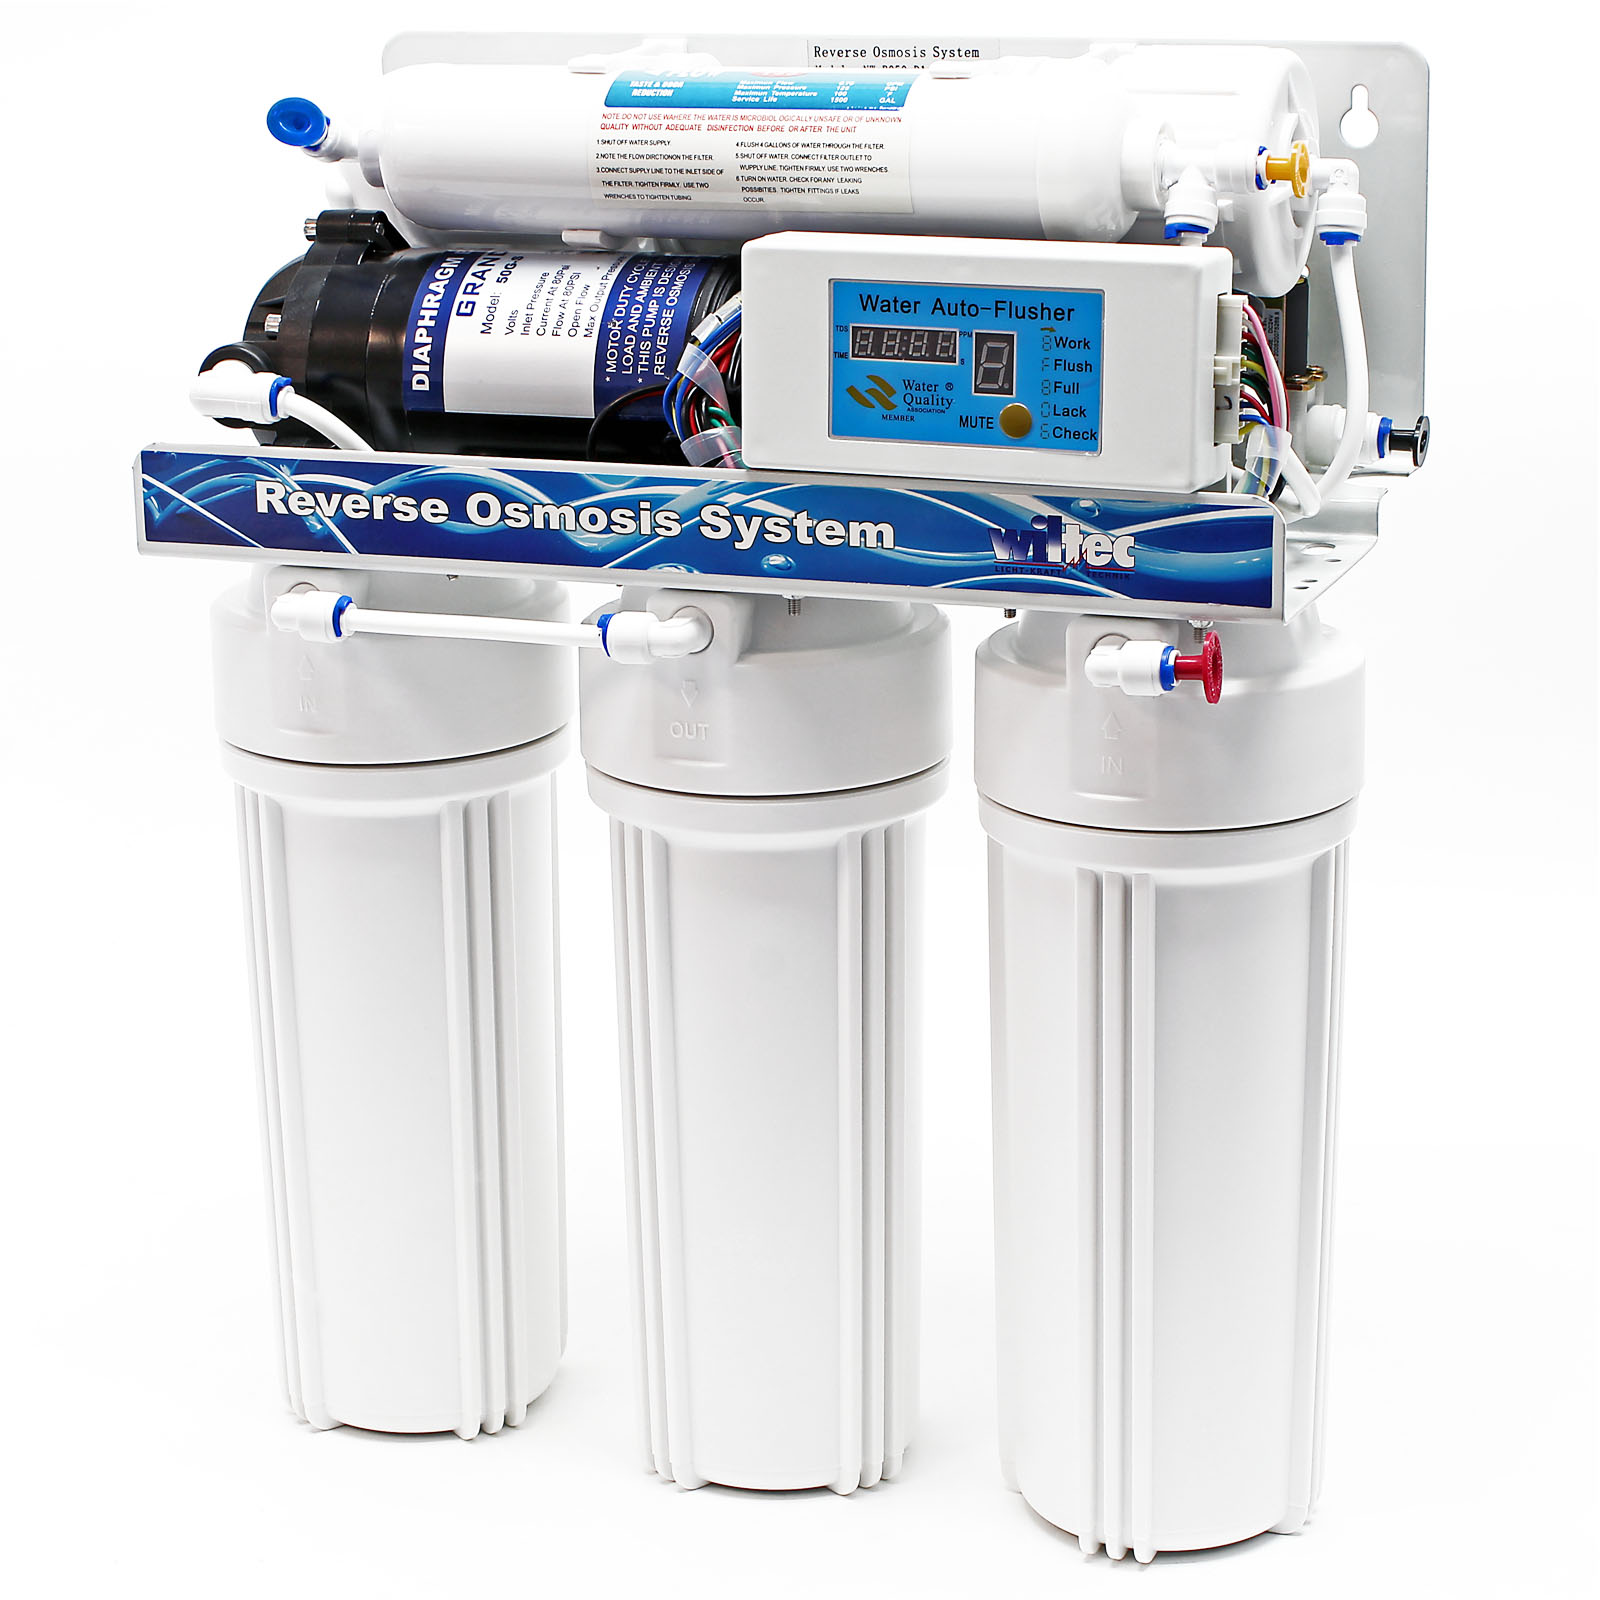 500L/H Reverse Osmosis/Osmose Inverse System/RO Drinking Water